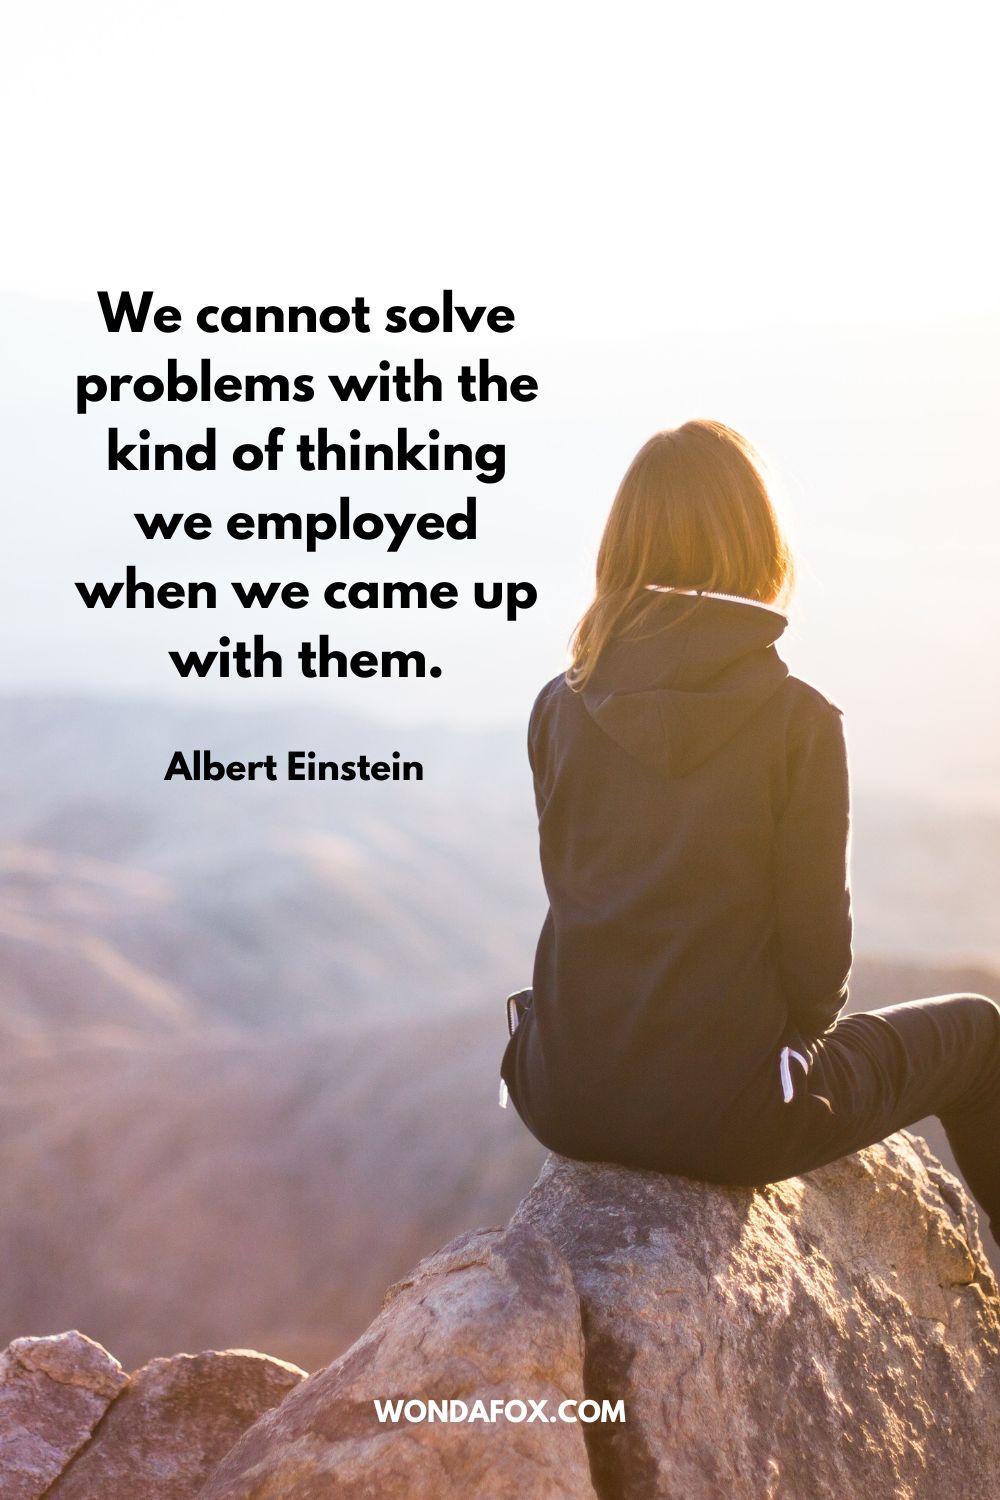 We cannot solve problems with the kind of thinking we employed when we came up with them. Albert Einstein